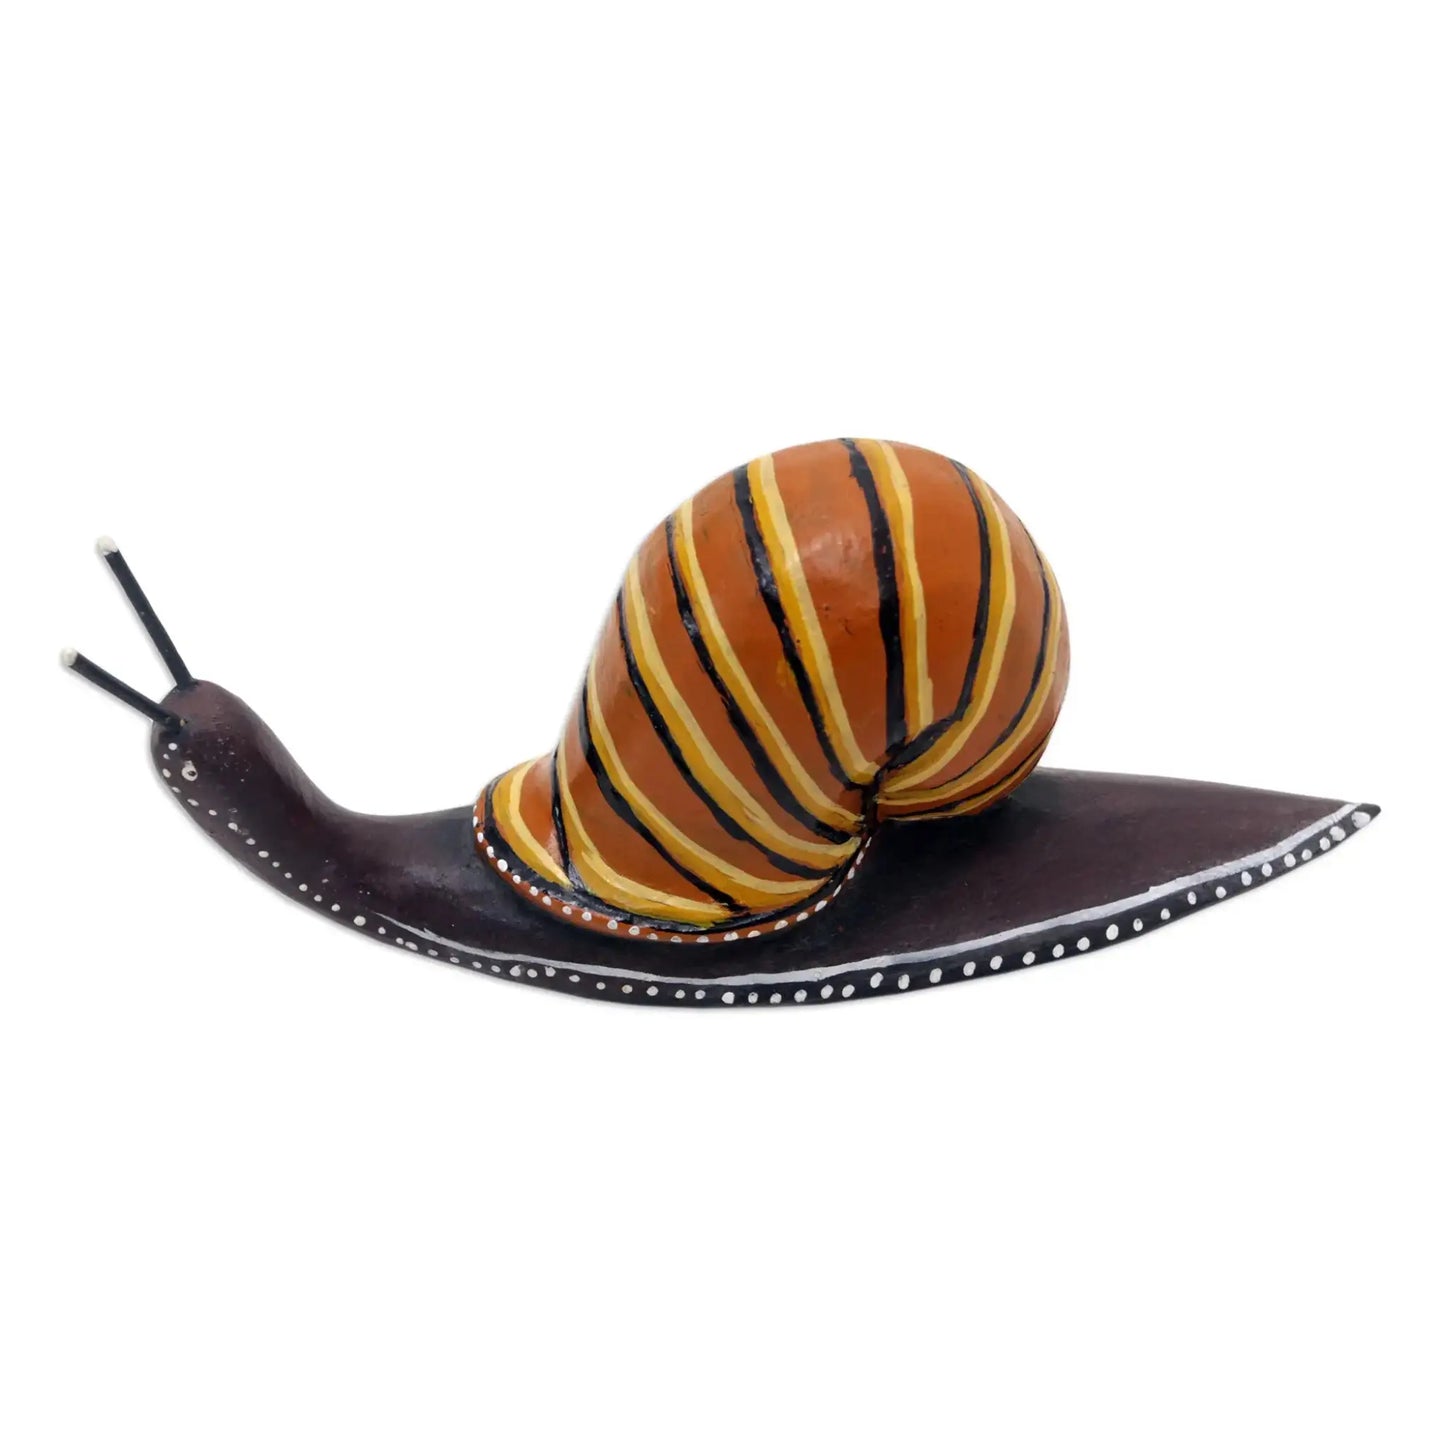 At a Snail’s Pace - Hand-Carved Suar Wood Snail Statuette